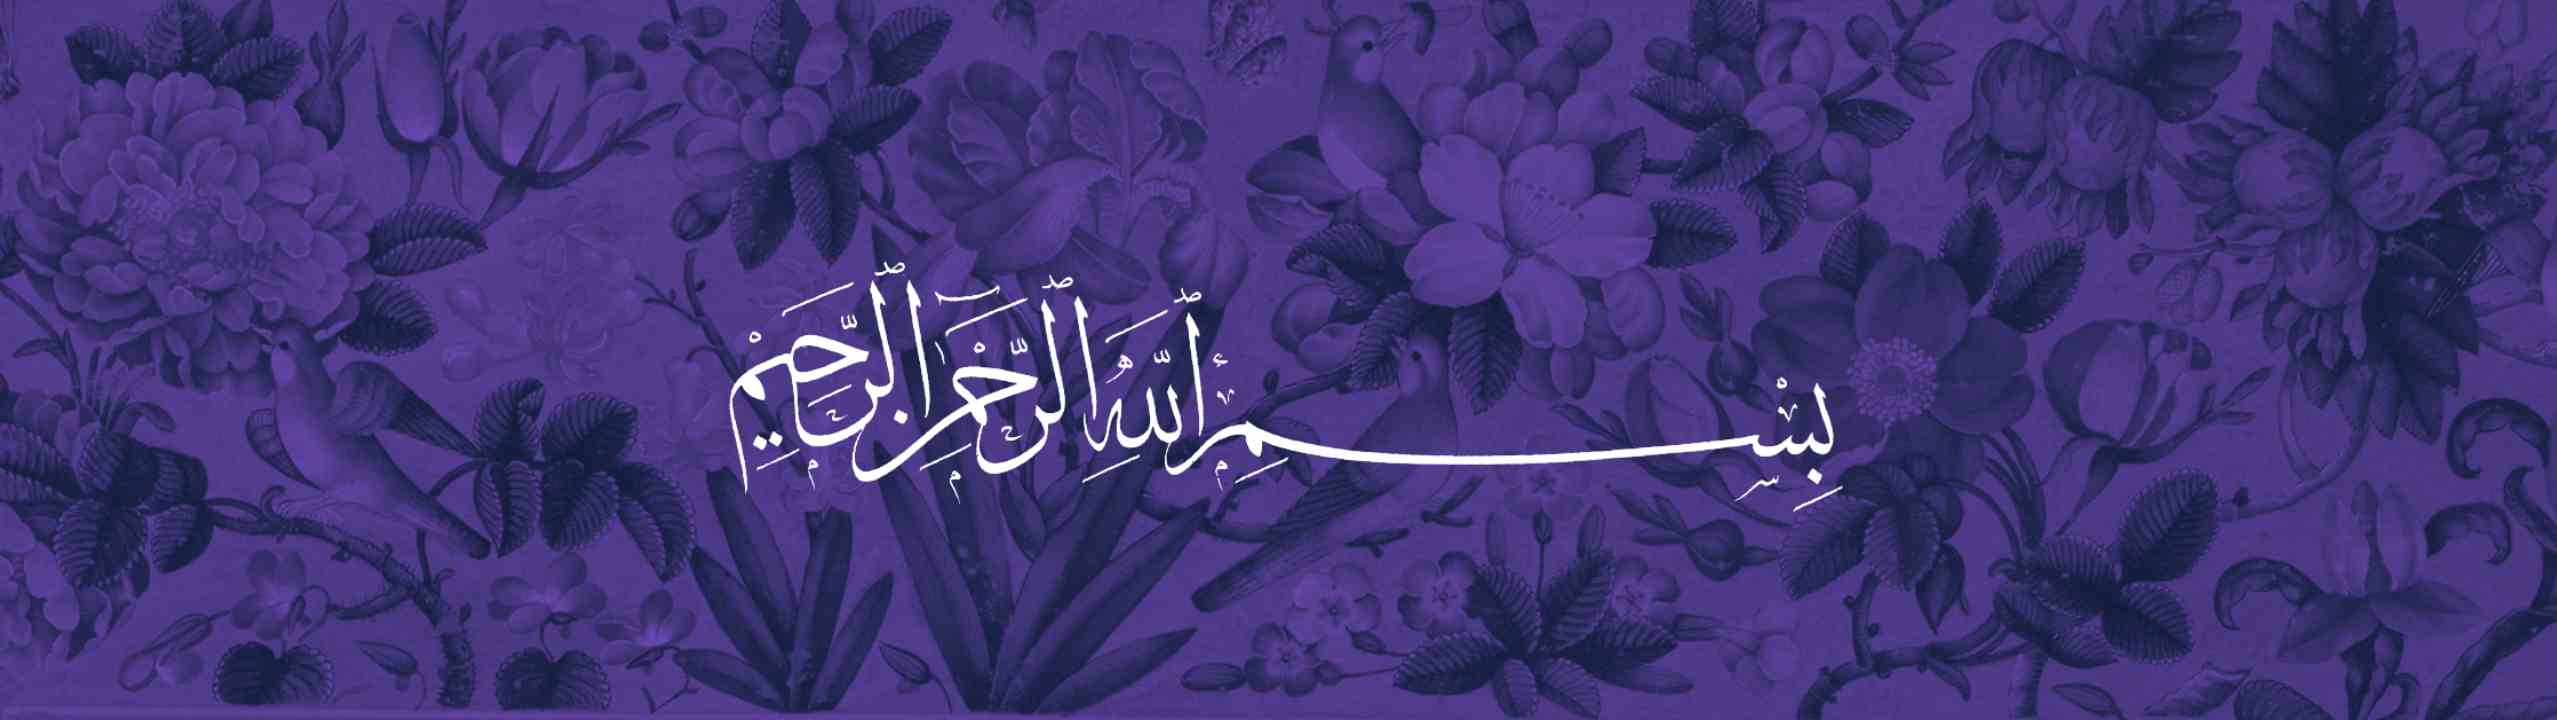 A purple and dark blue flower pattern overlaid by a white calligraphic basmala